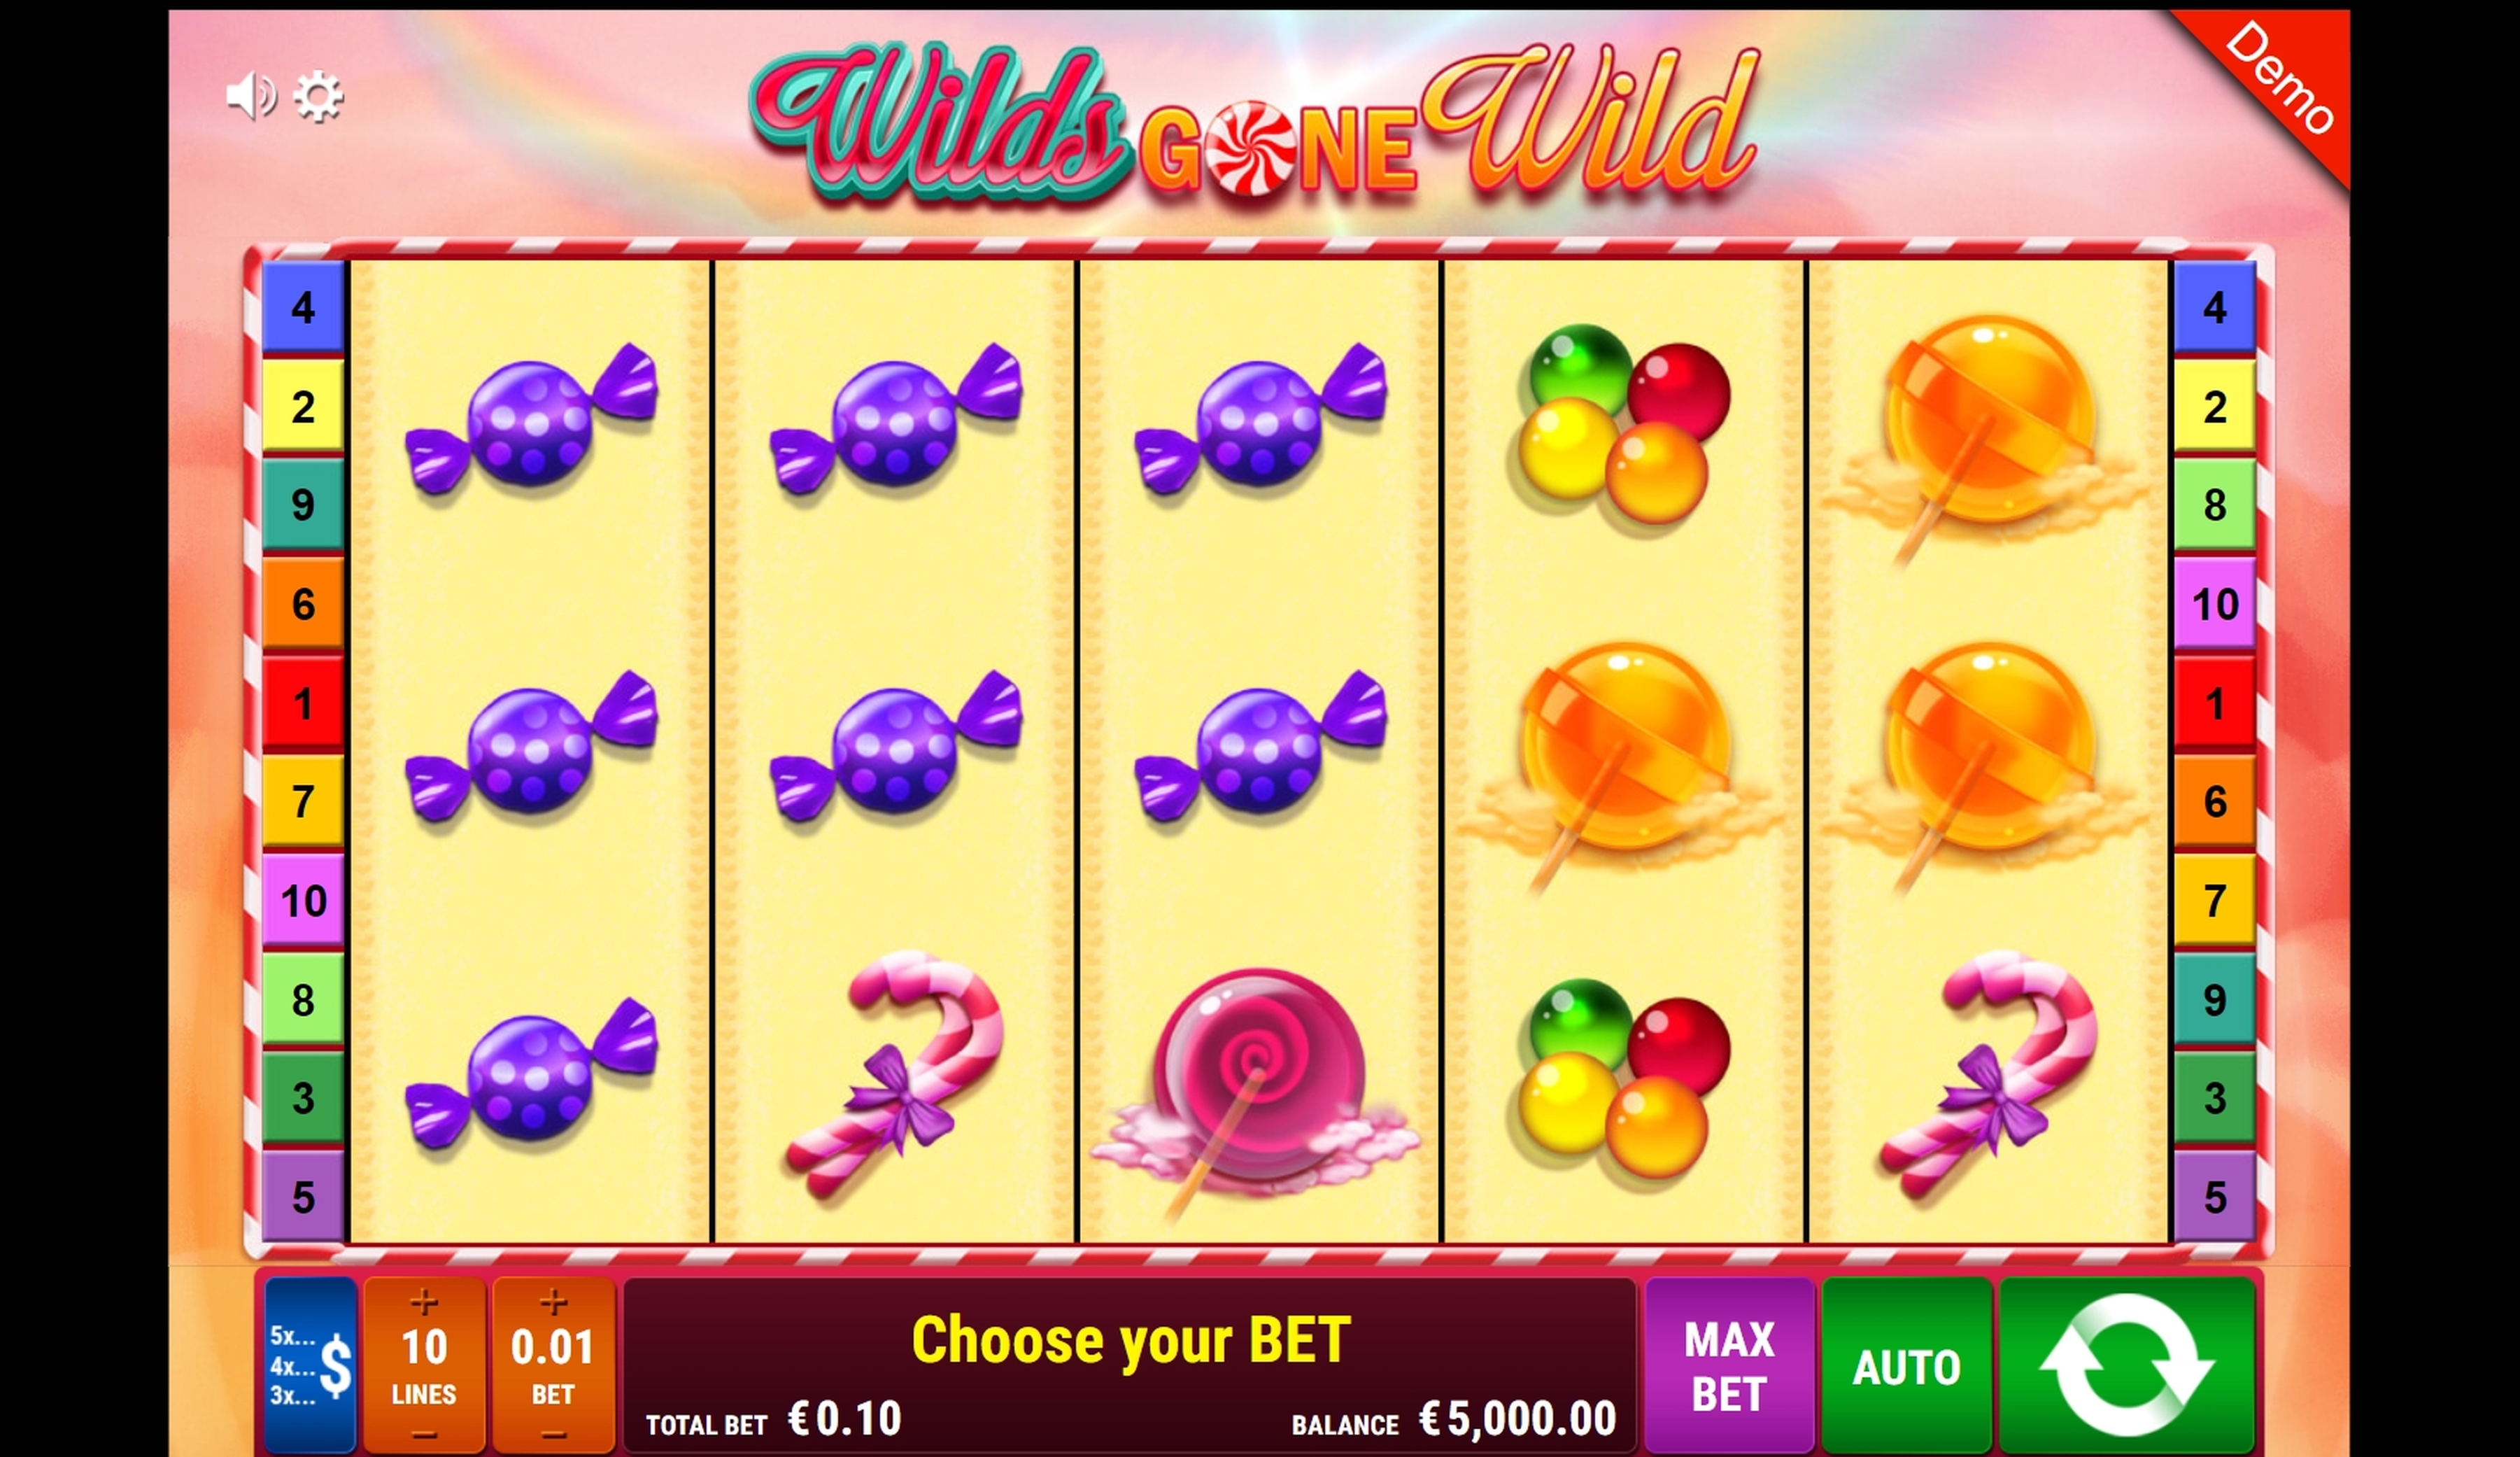 Reels in Wilds gone wild Slot Game by Gamomat